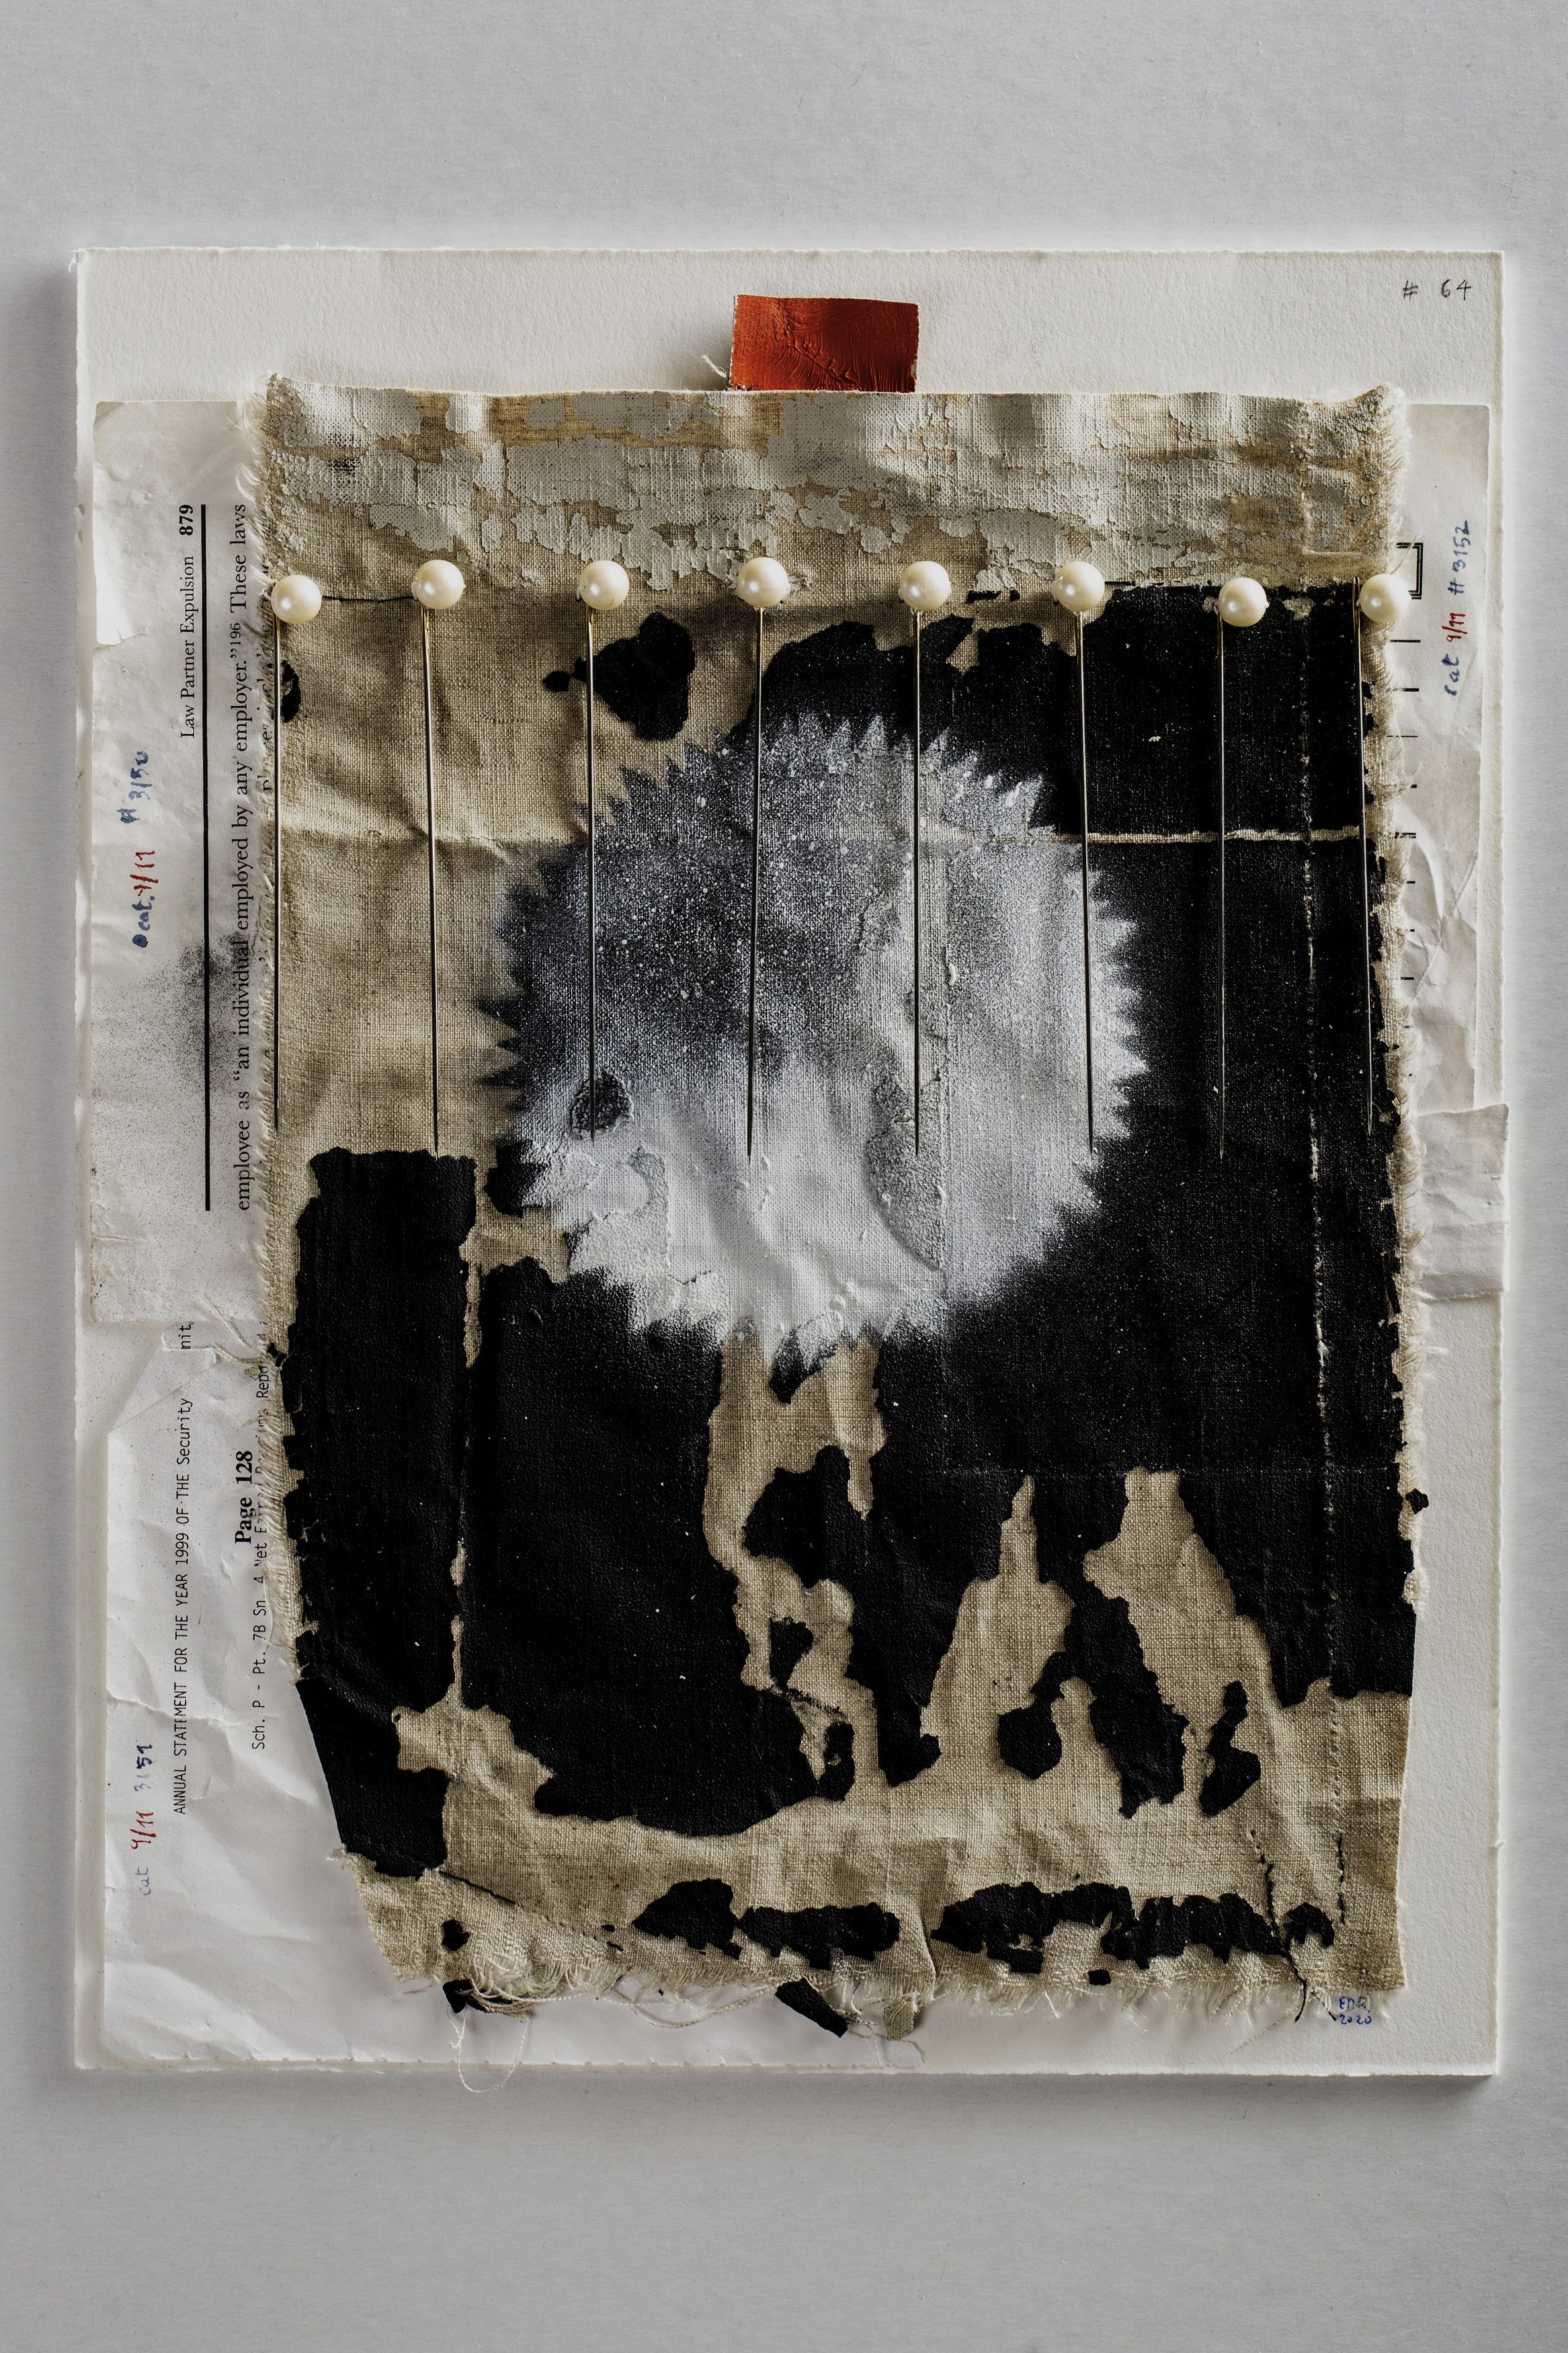  Memory I, #64  2020   9/11 and Sandy salvaged fragments of oil on primed linen, stitching, graphite, 9/11 found fragments of documents, ink on paper, fake pearls, needles and ink on museum board   11-1/2” x 9”  